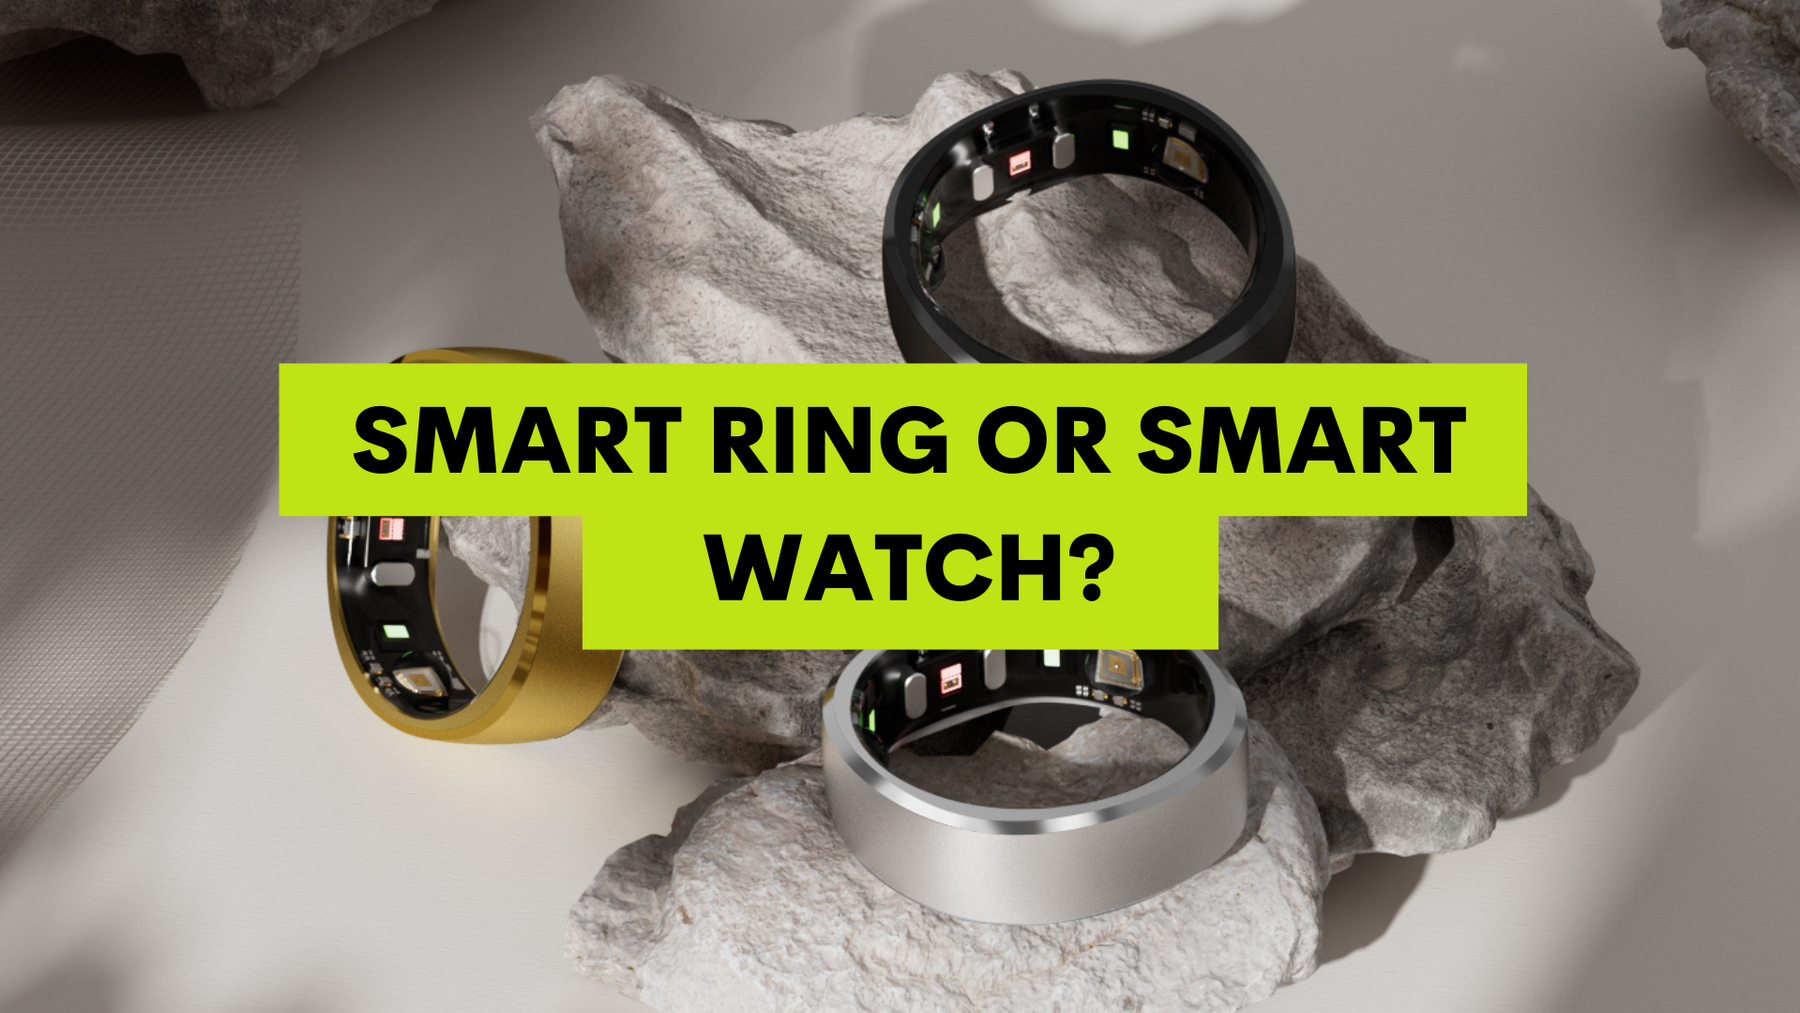 Smart Ring or Smart Watch? A New Type of Wearable to Track your Health